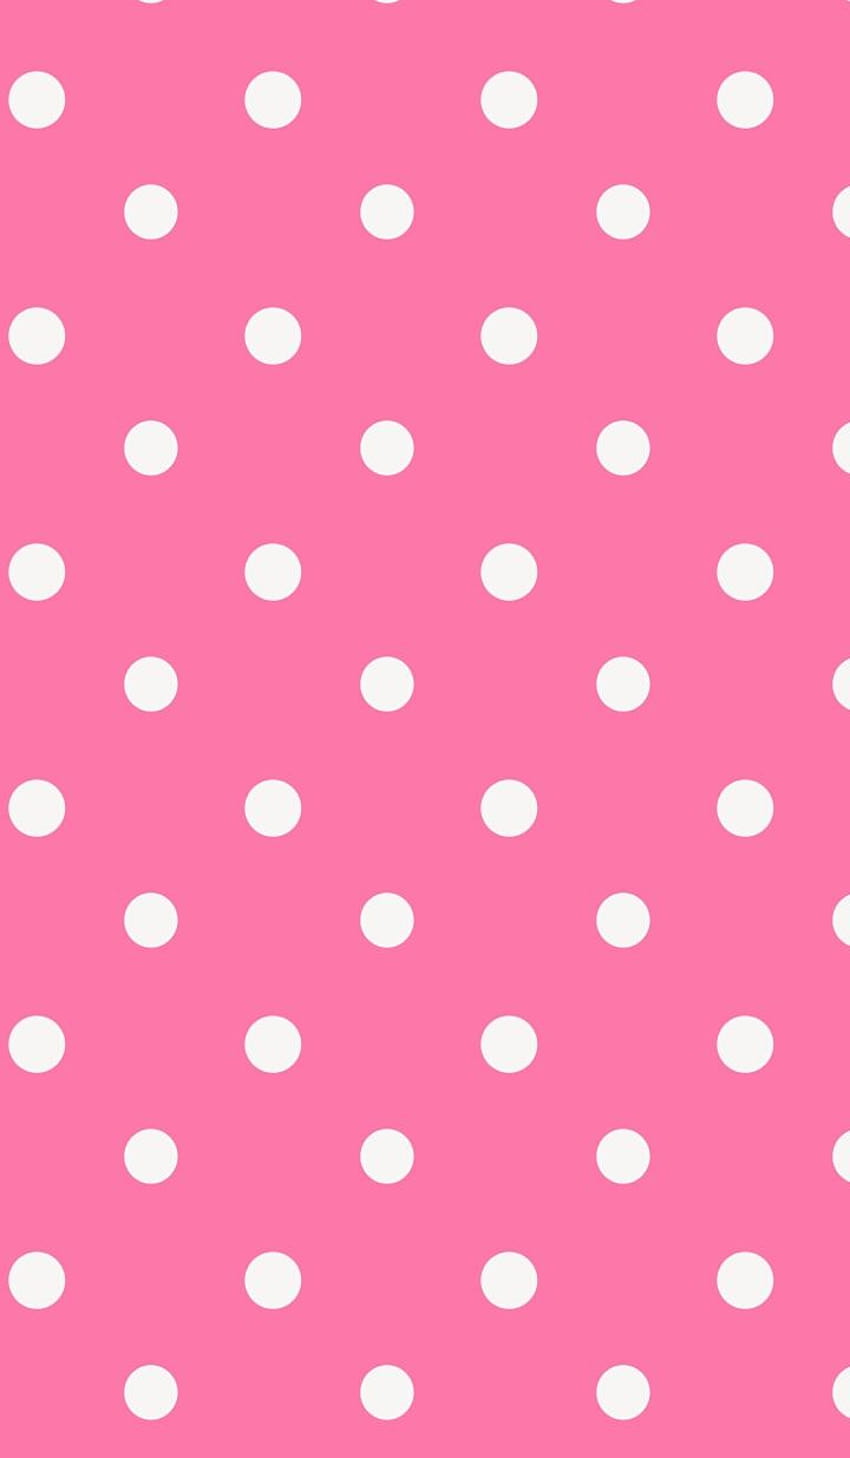 art, background, beautiful, beauty, colorful, colour, design, dots, iphone, kawaii, pastel, pattern, patterns, pink, polka dot, style, texture, we heart it, pink pattern, pink background, pastel pink, beautiful art, pastel color, polkadot HD phone wallpaper